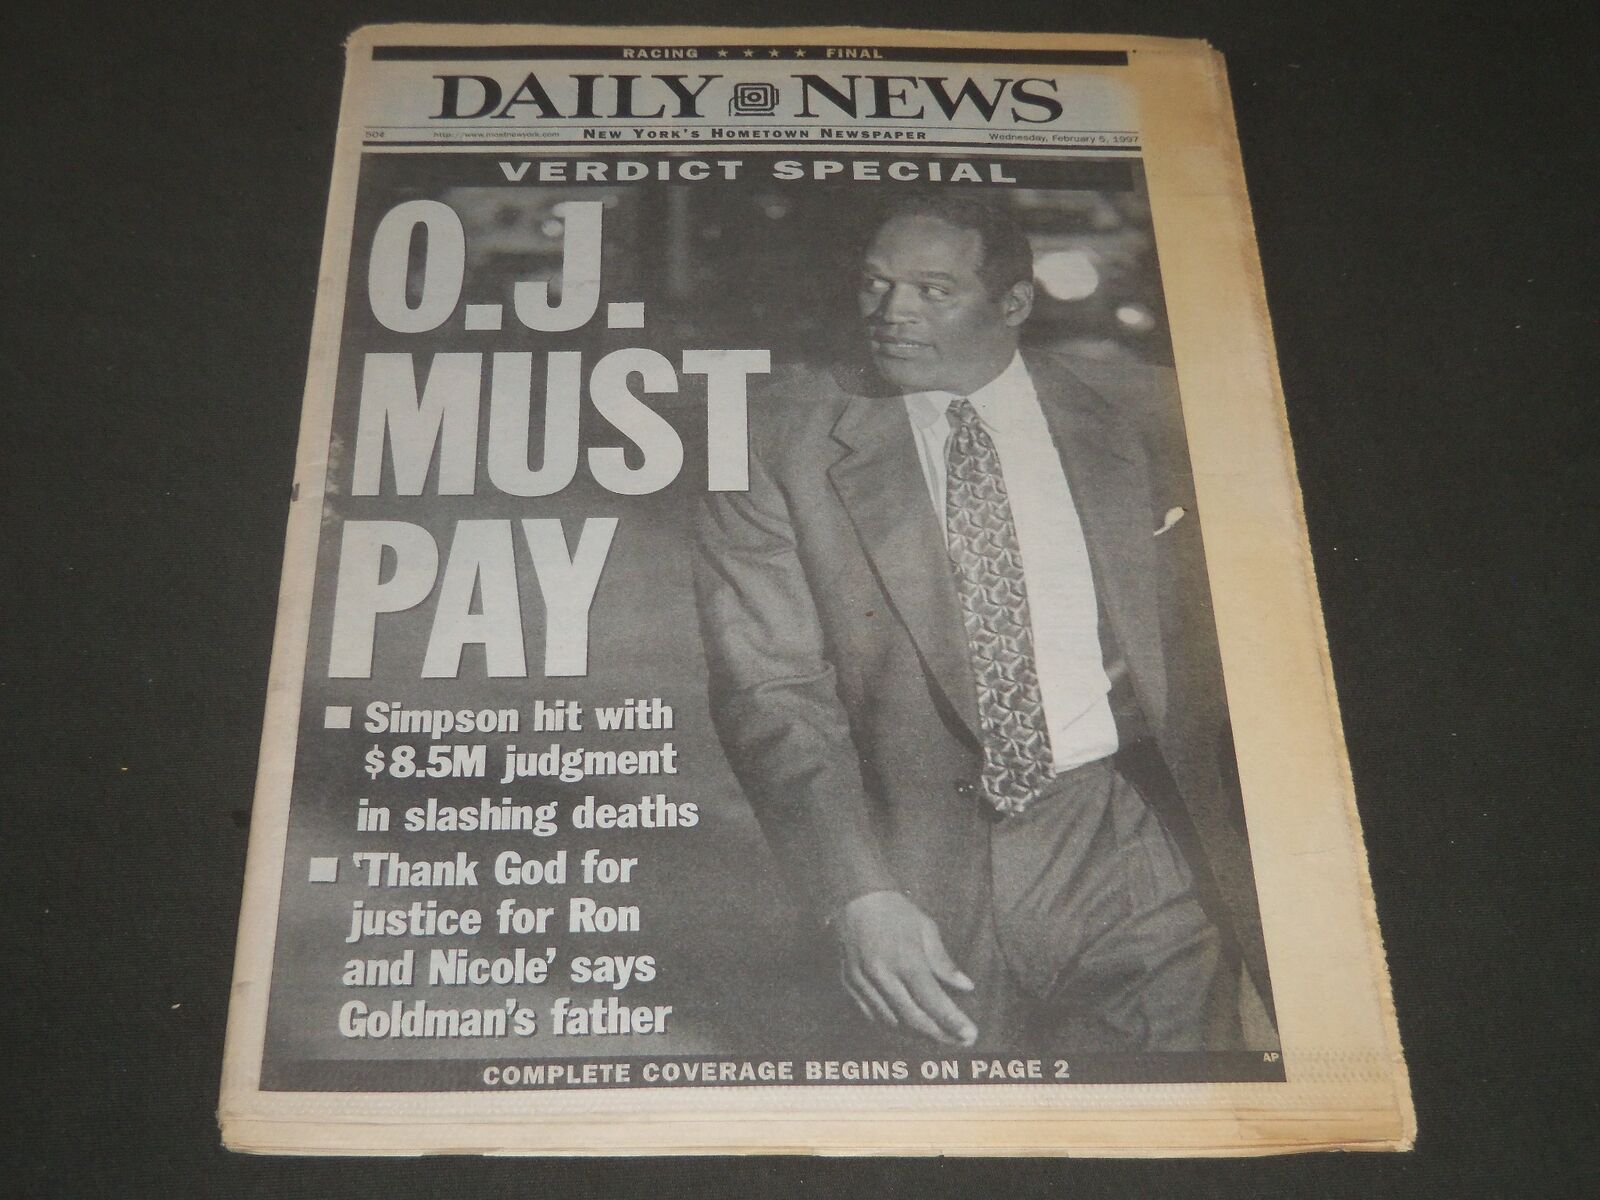 1997 FEBRUARY 5 NY DAILY NEWS NEWSPAPER - O. J. MUST PAY - JETS - NP 2536